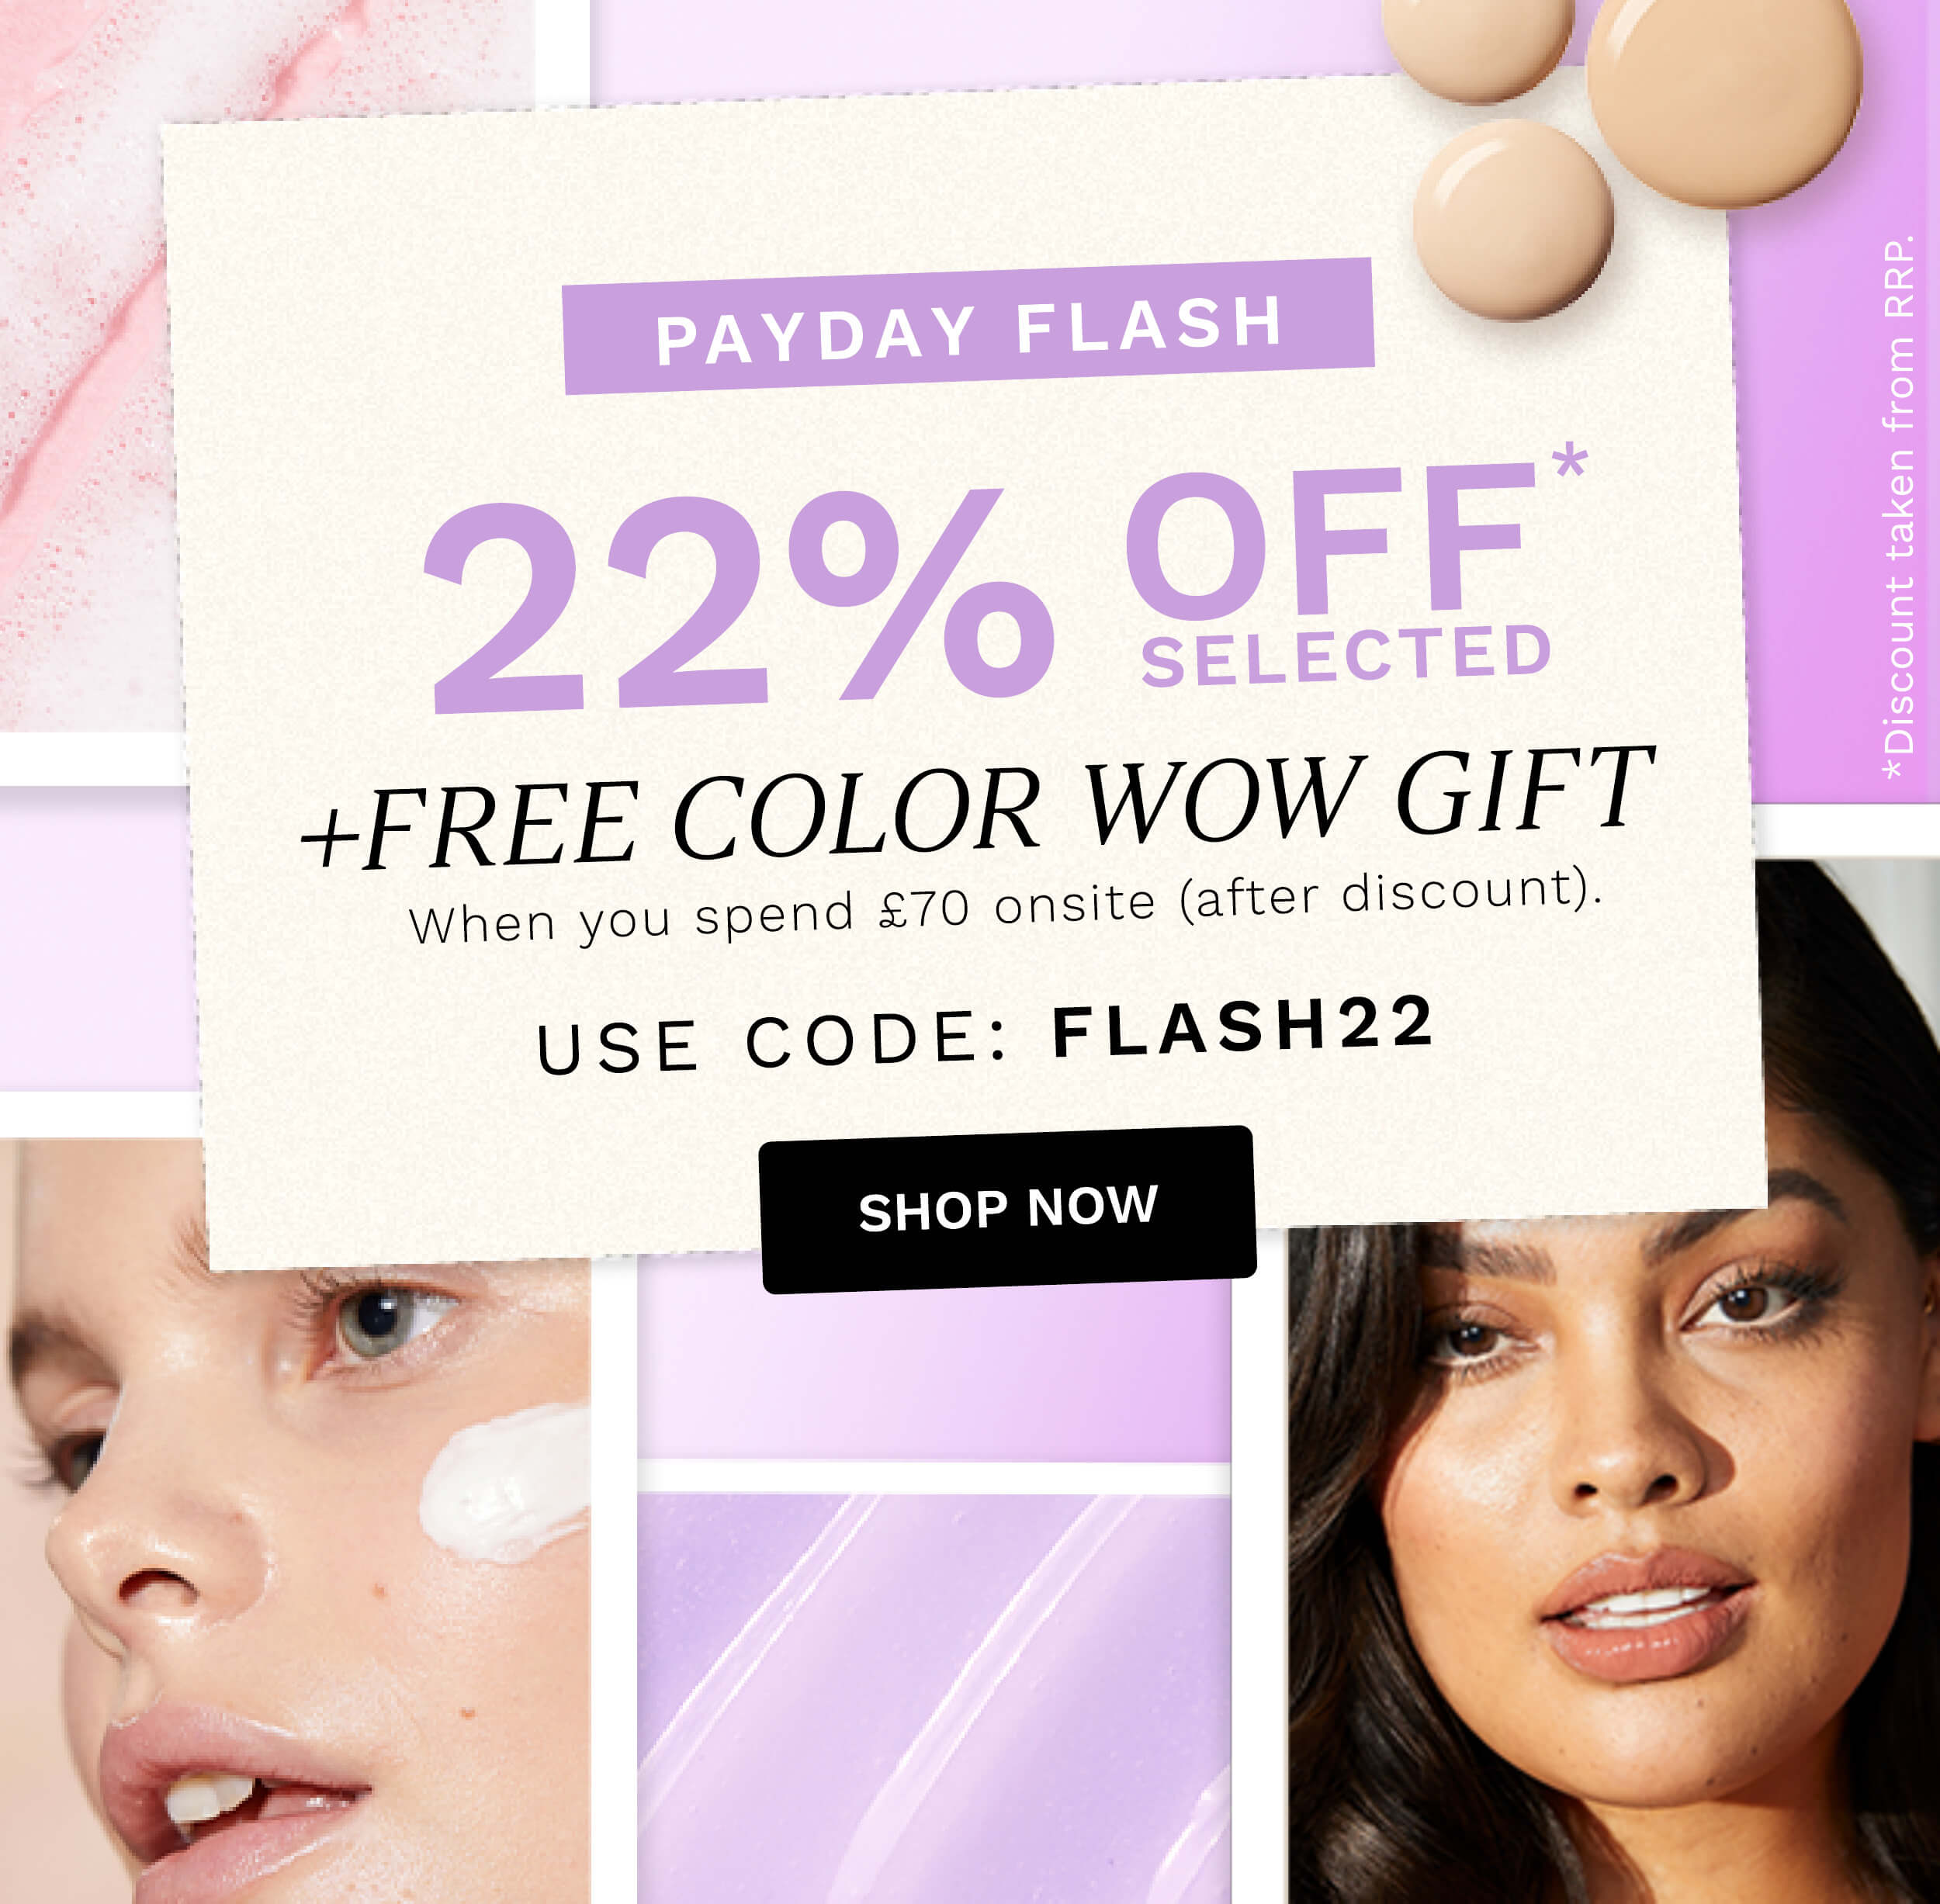 FREE COLOR WOW GIFT When you spend 70 onsite after discount. USE CODE: FLASH22 SHOP NOW 